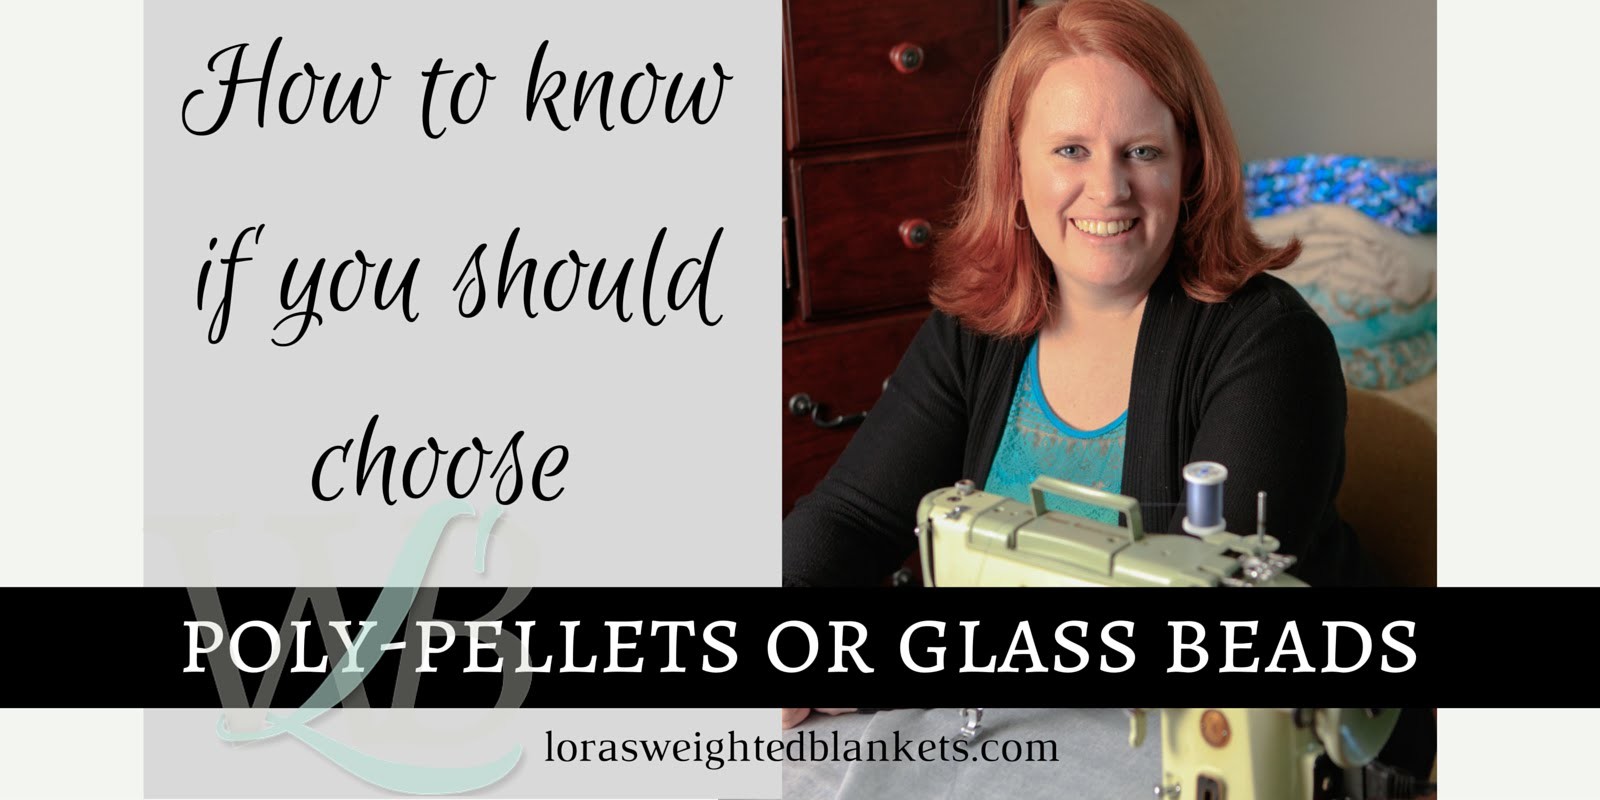 How to know if you should choose poly-pellets or glass beads.